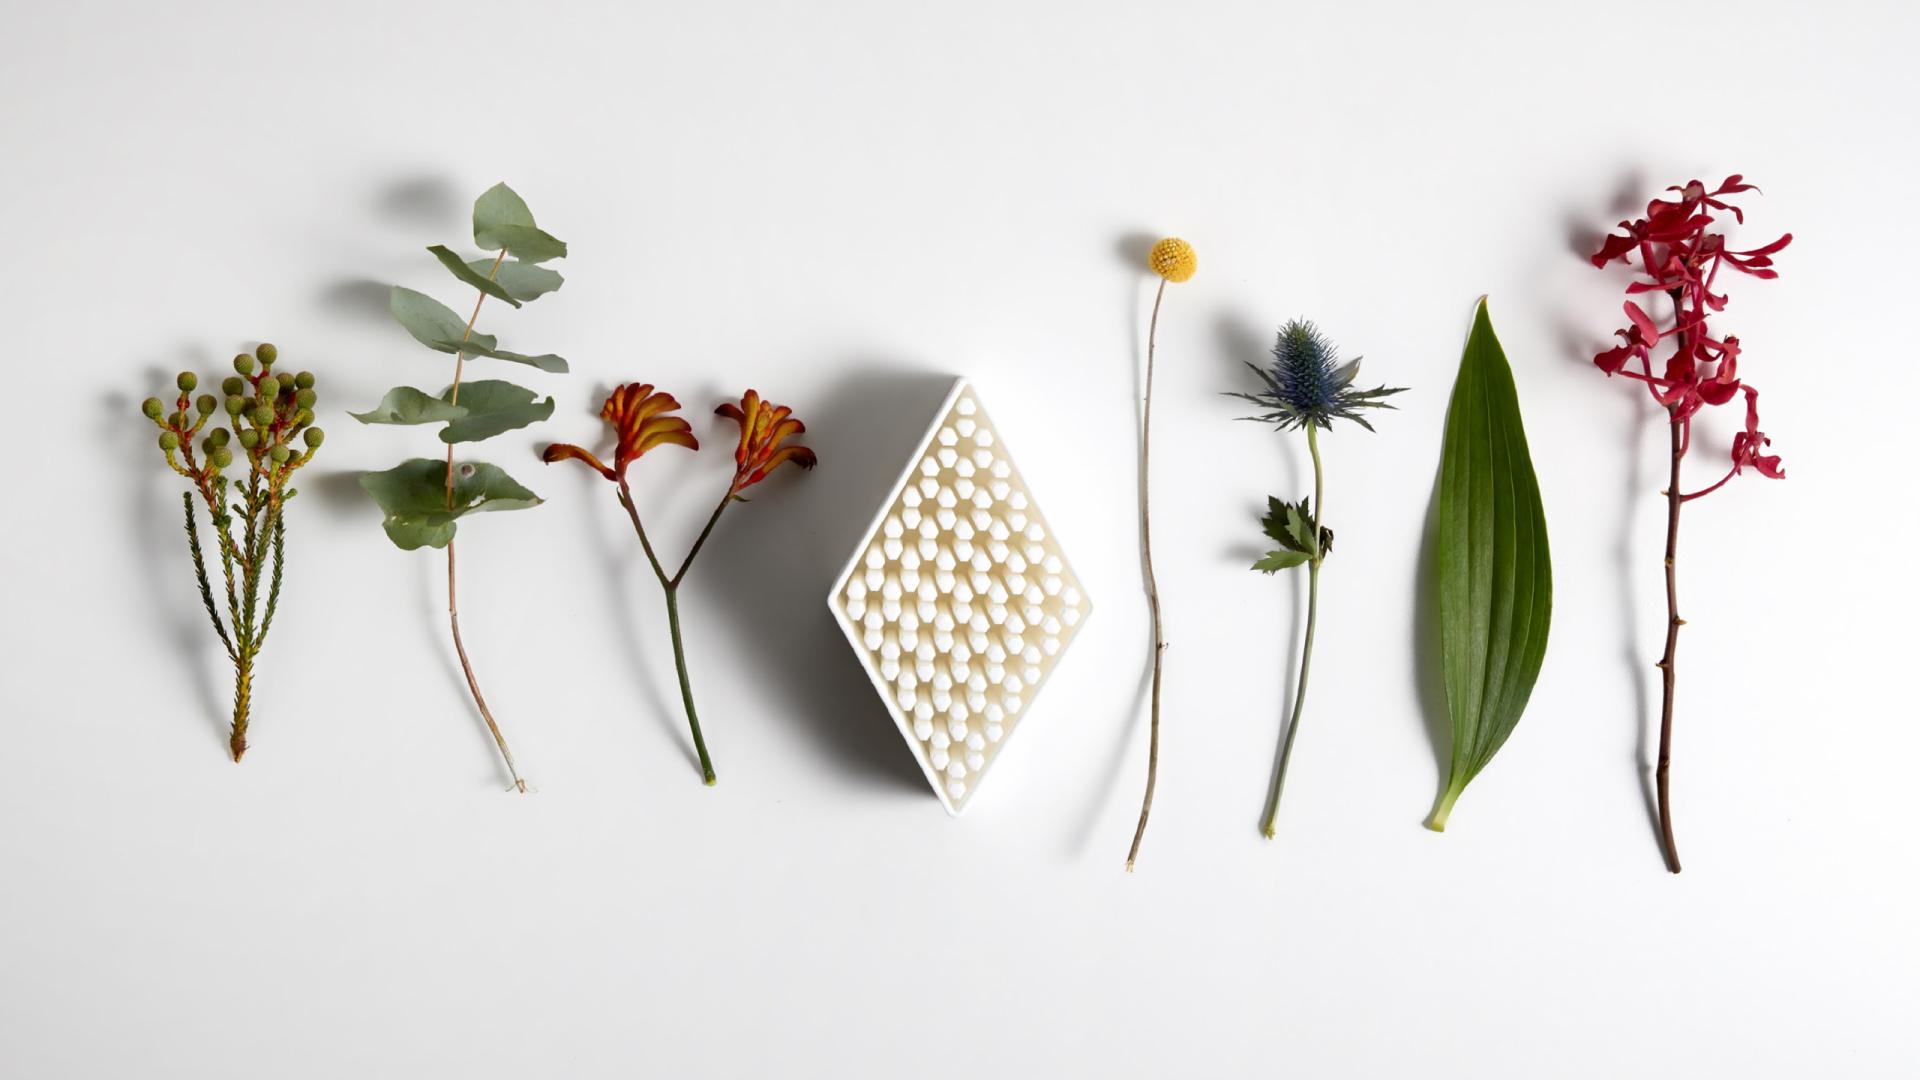 Image of a series of dried native flowers laid on in a row, at the centre of the image is a 3D printed diamond shape plant holder.